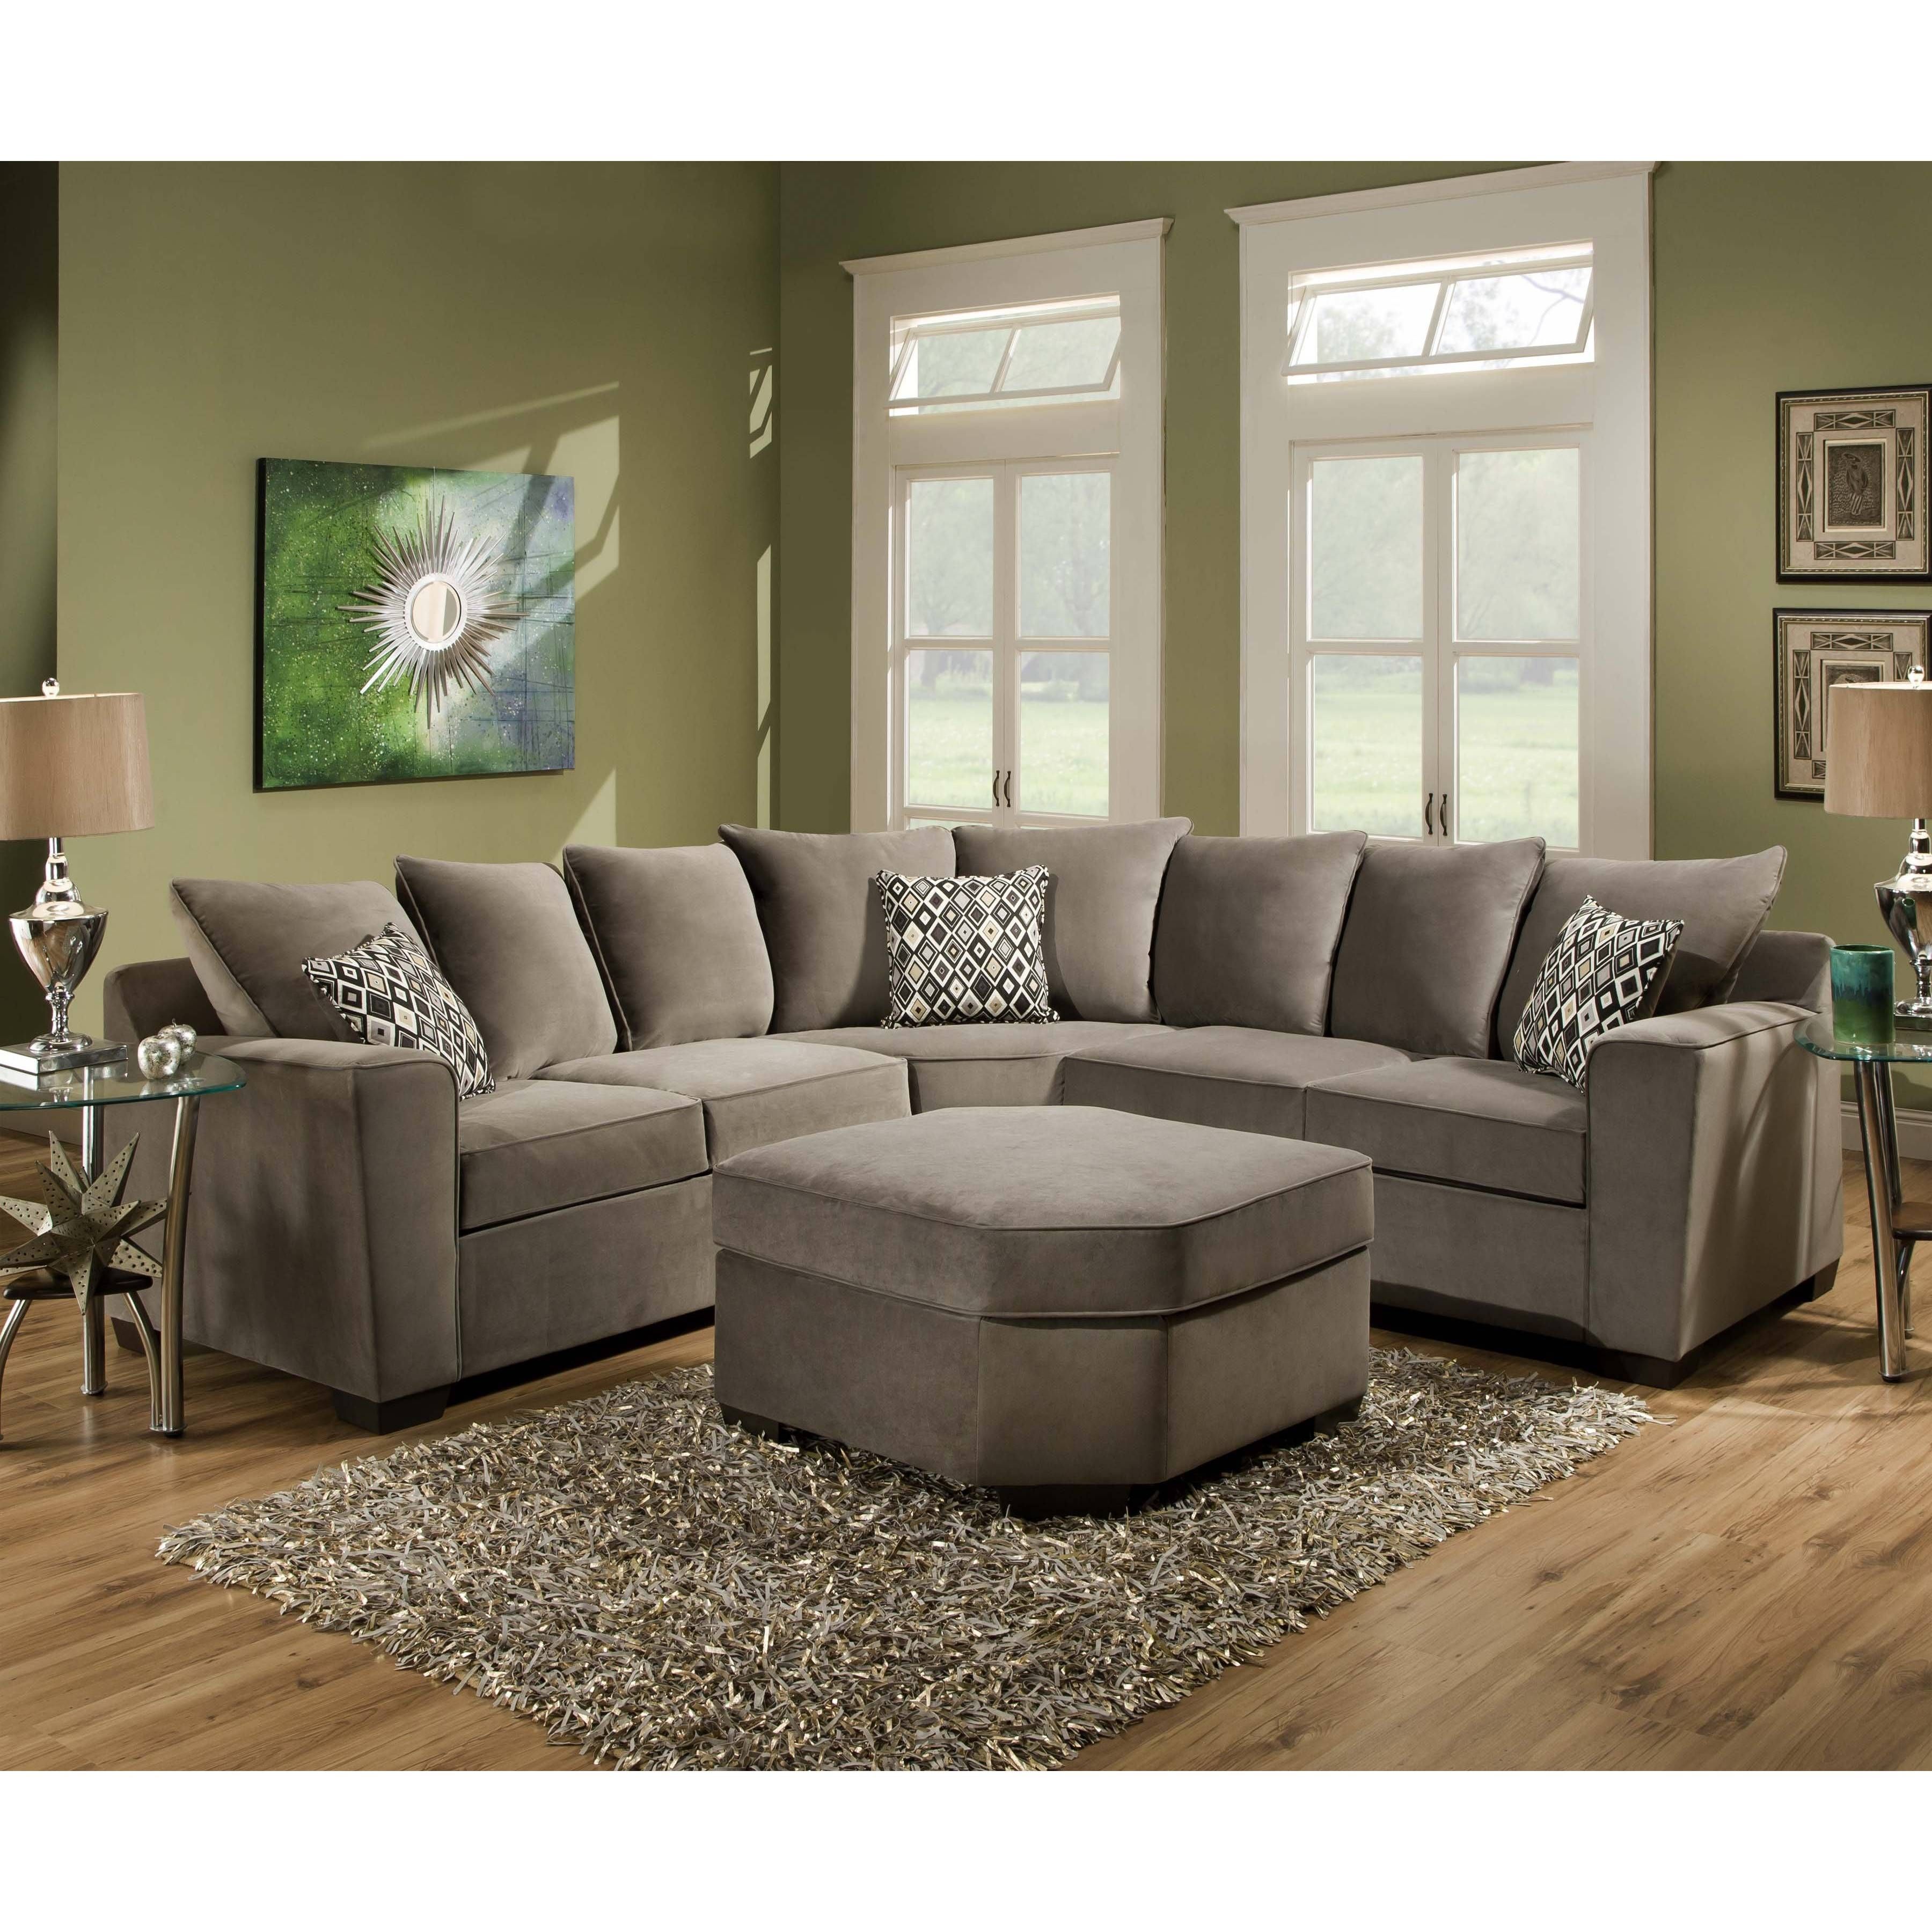 10 Foot Sectional Sofa – Tourdecarroll For 10 Foot Sectional Sofa (Photo 112 of 299)